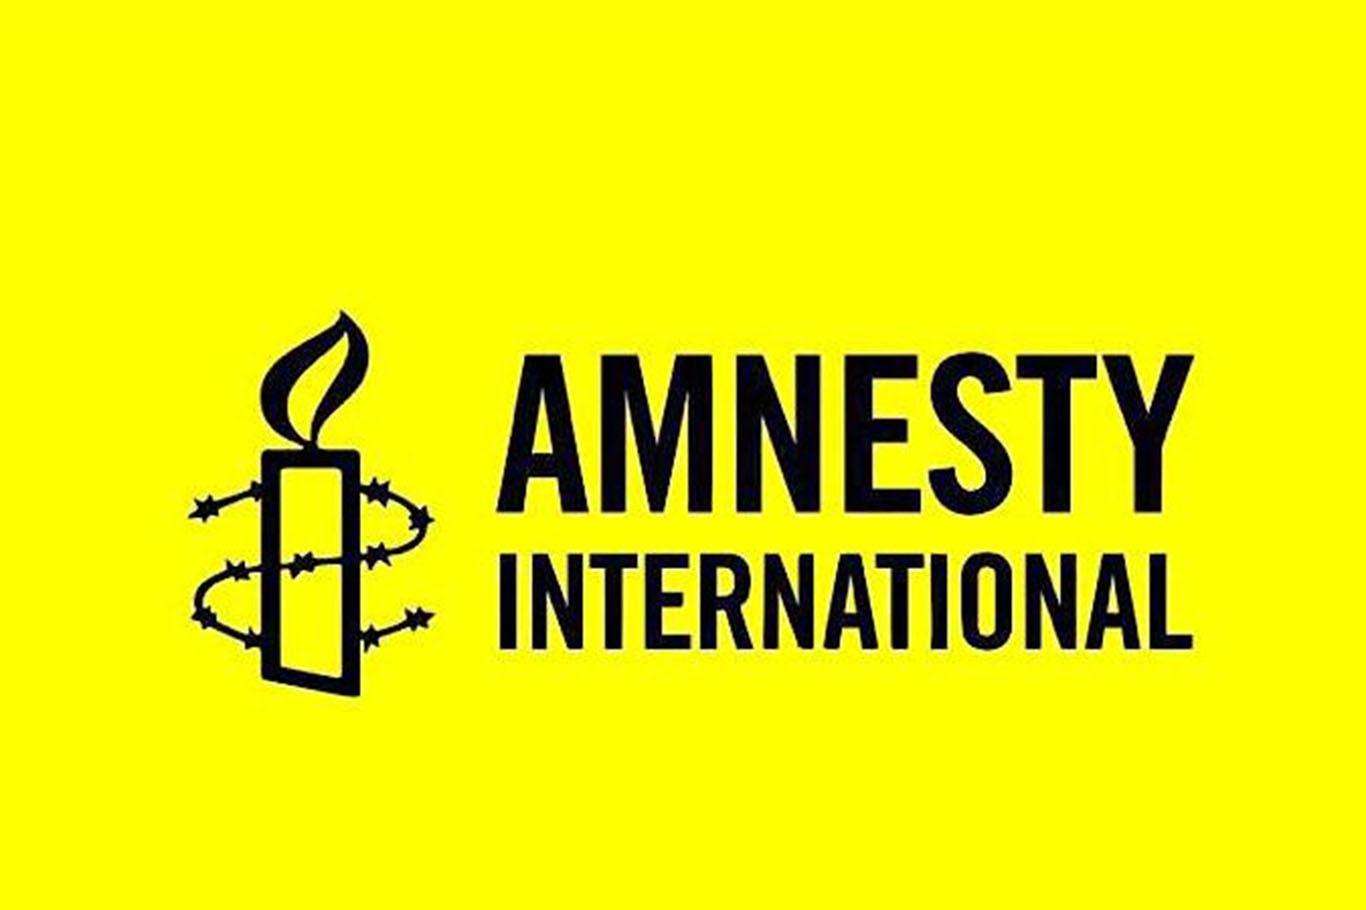 Detainees in Egypt's overcrowded jails being denied healthcare: Amnesty International